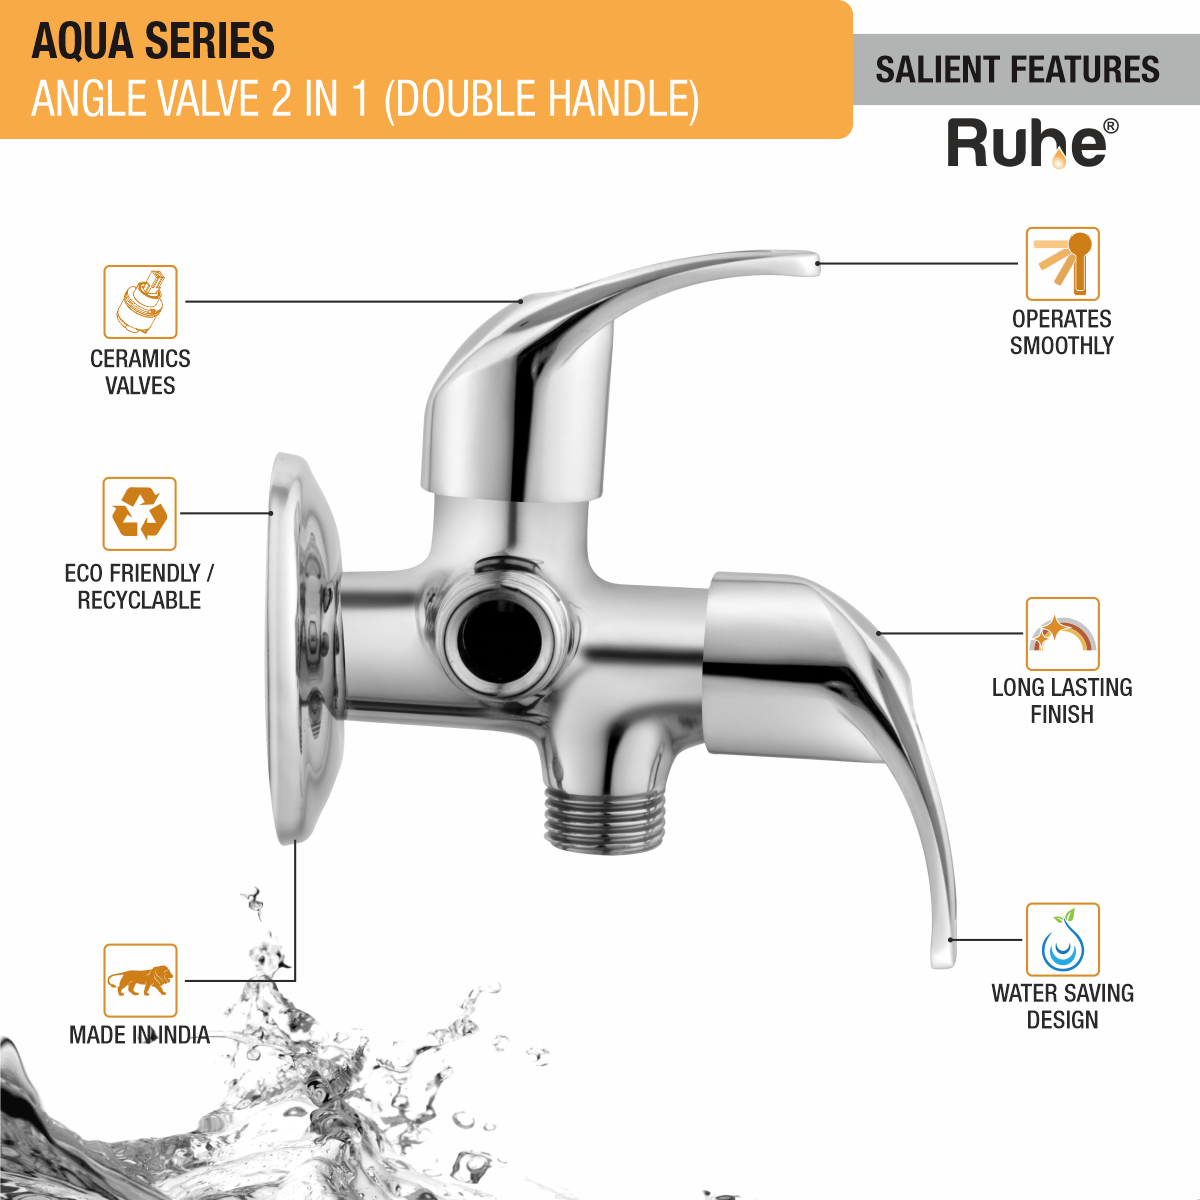 Aqua Two Way Angle Valve Brass Faucet (Double Handle) features